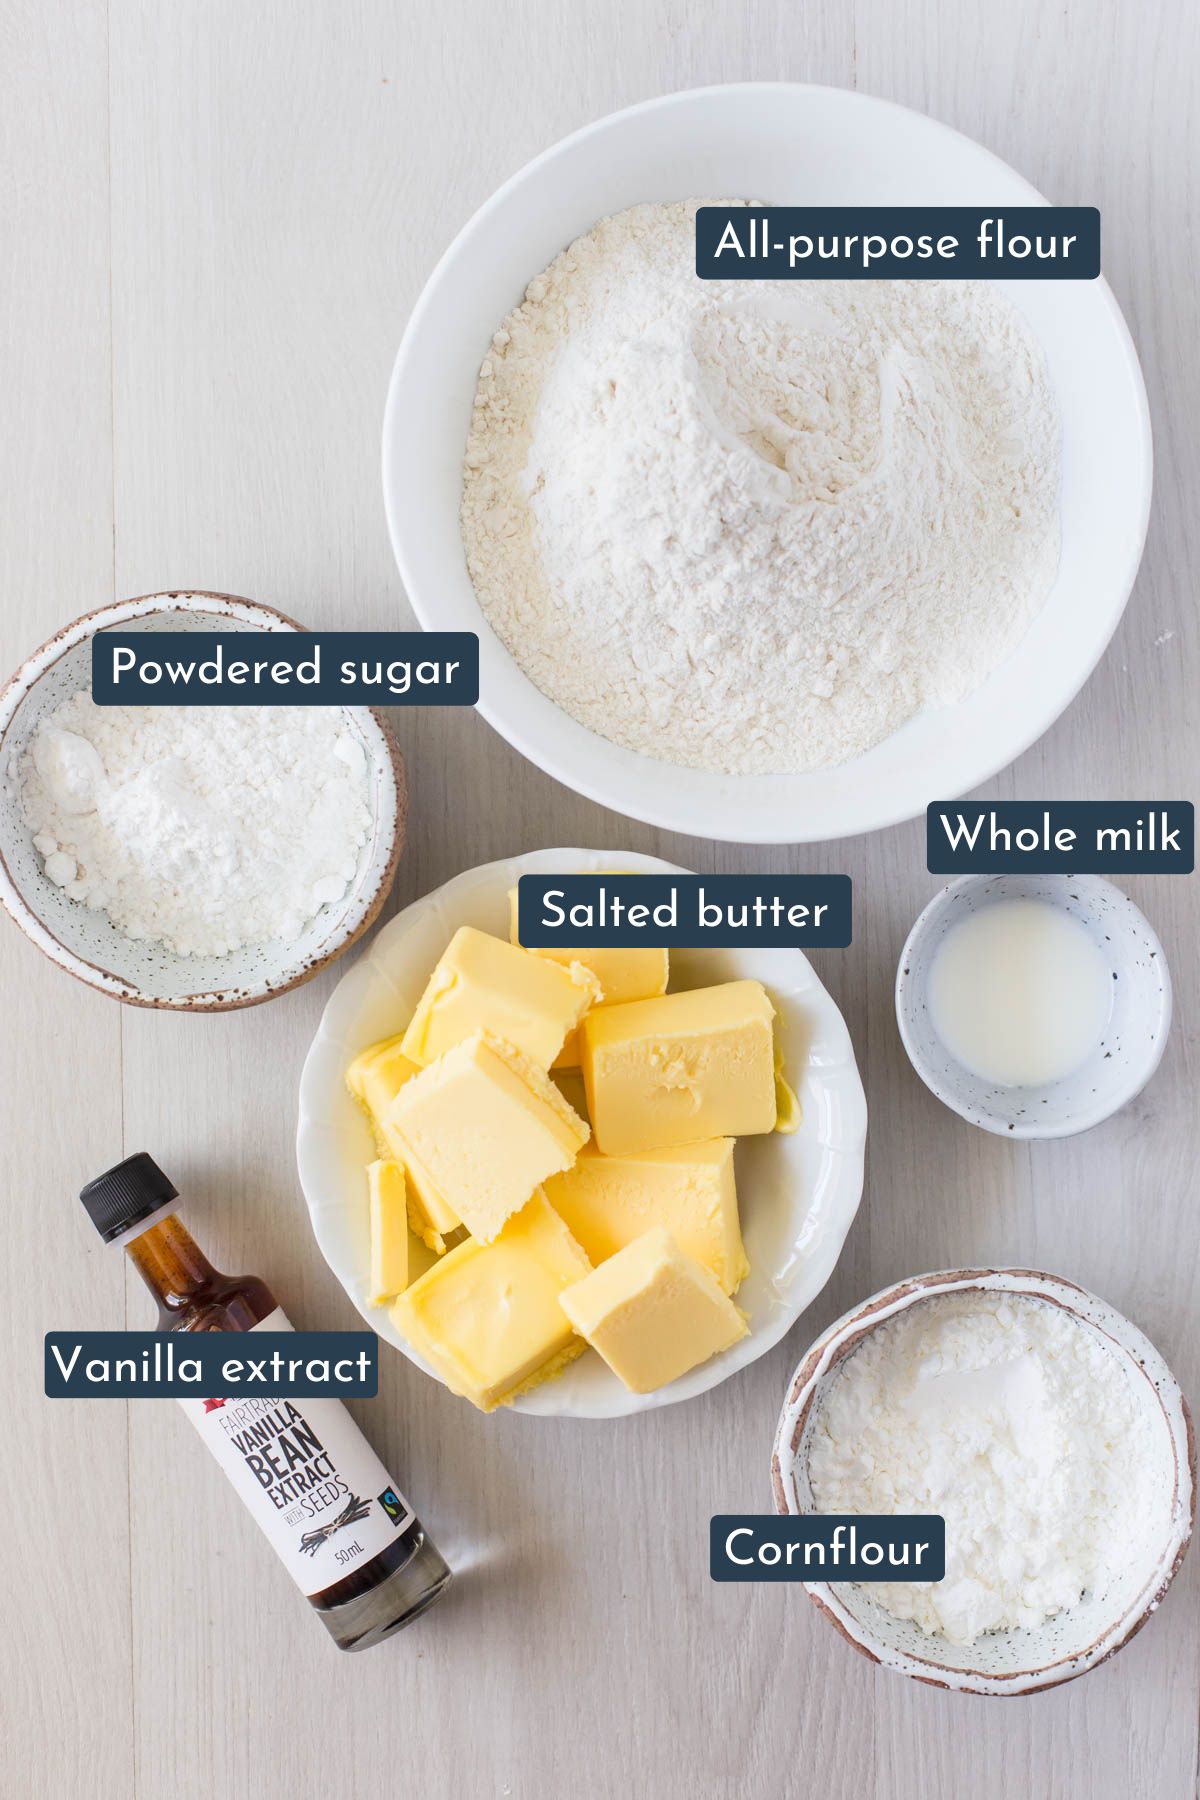 Ingredients to make vanilla melting moments are all-purpose flour, salted butter, vanilla extract, powdered sugar, whole milk and cornflour. or cornstarch